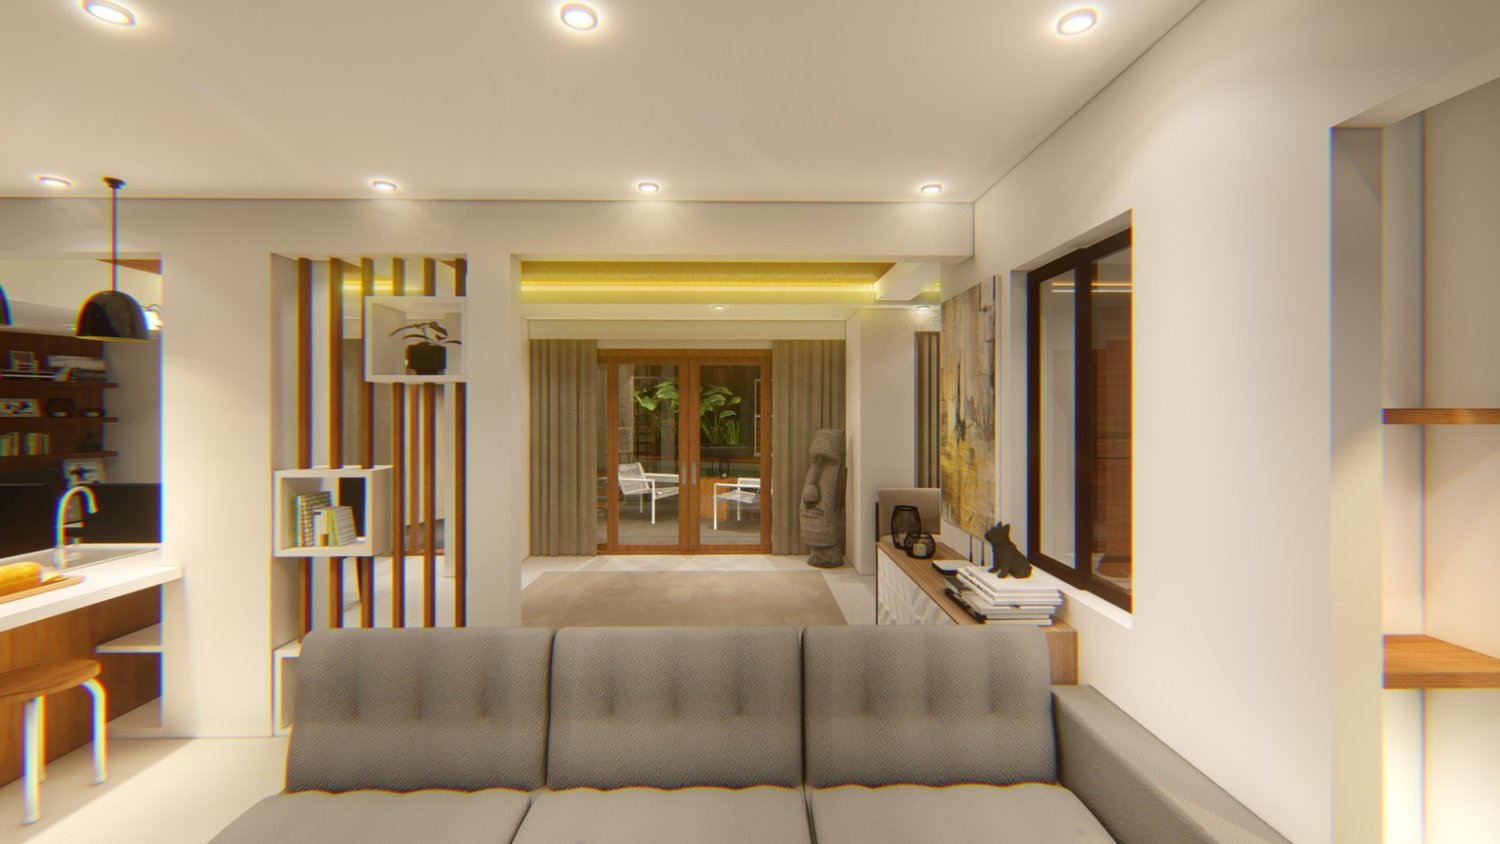 SRBBF1 Modern 5 Bedroom House for Sale in Mactan with Swimming Pool - Cebu Grand Realty (9)